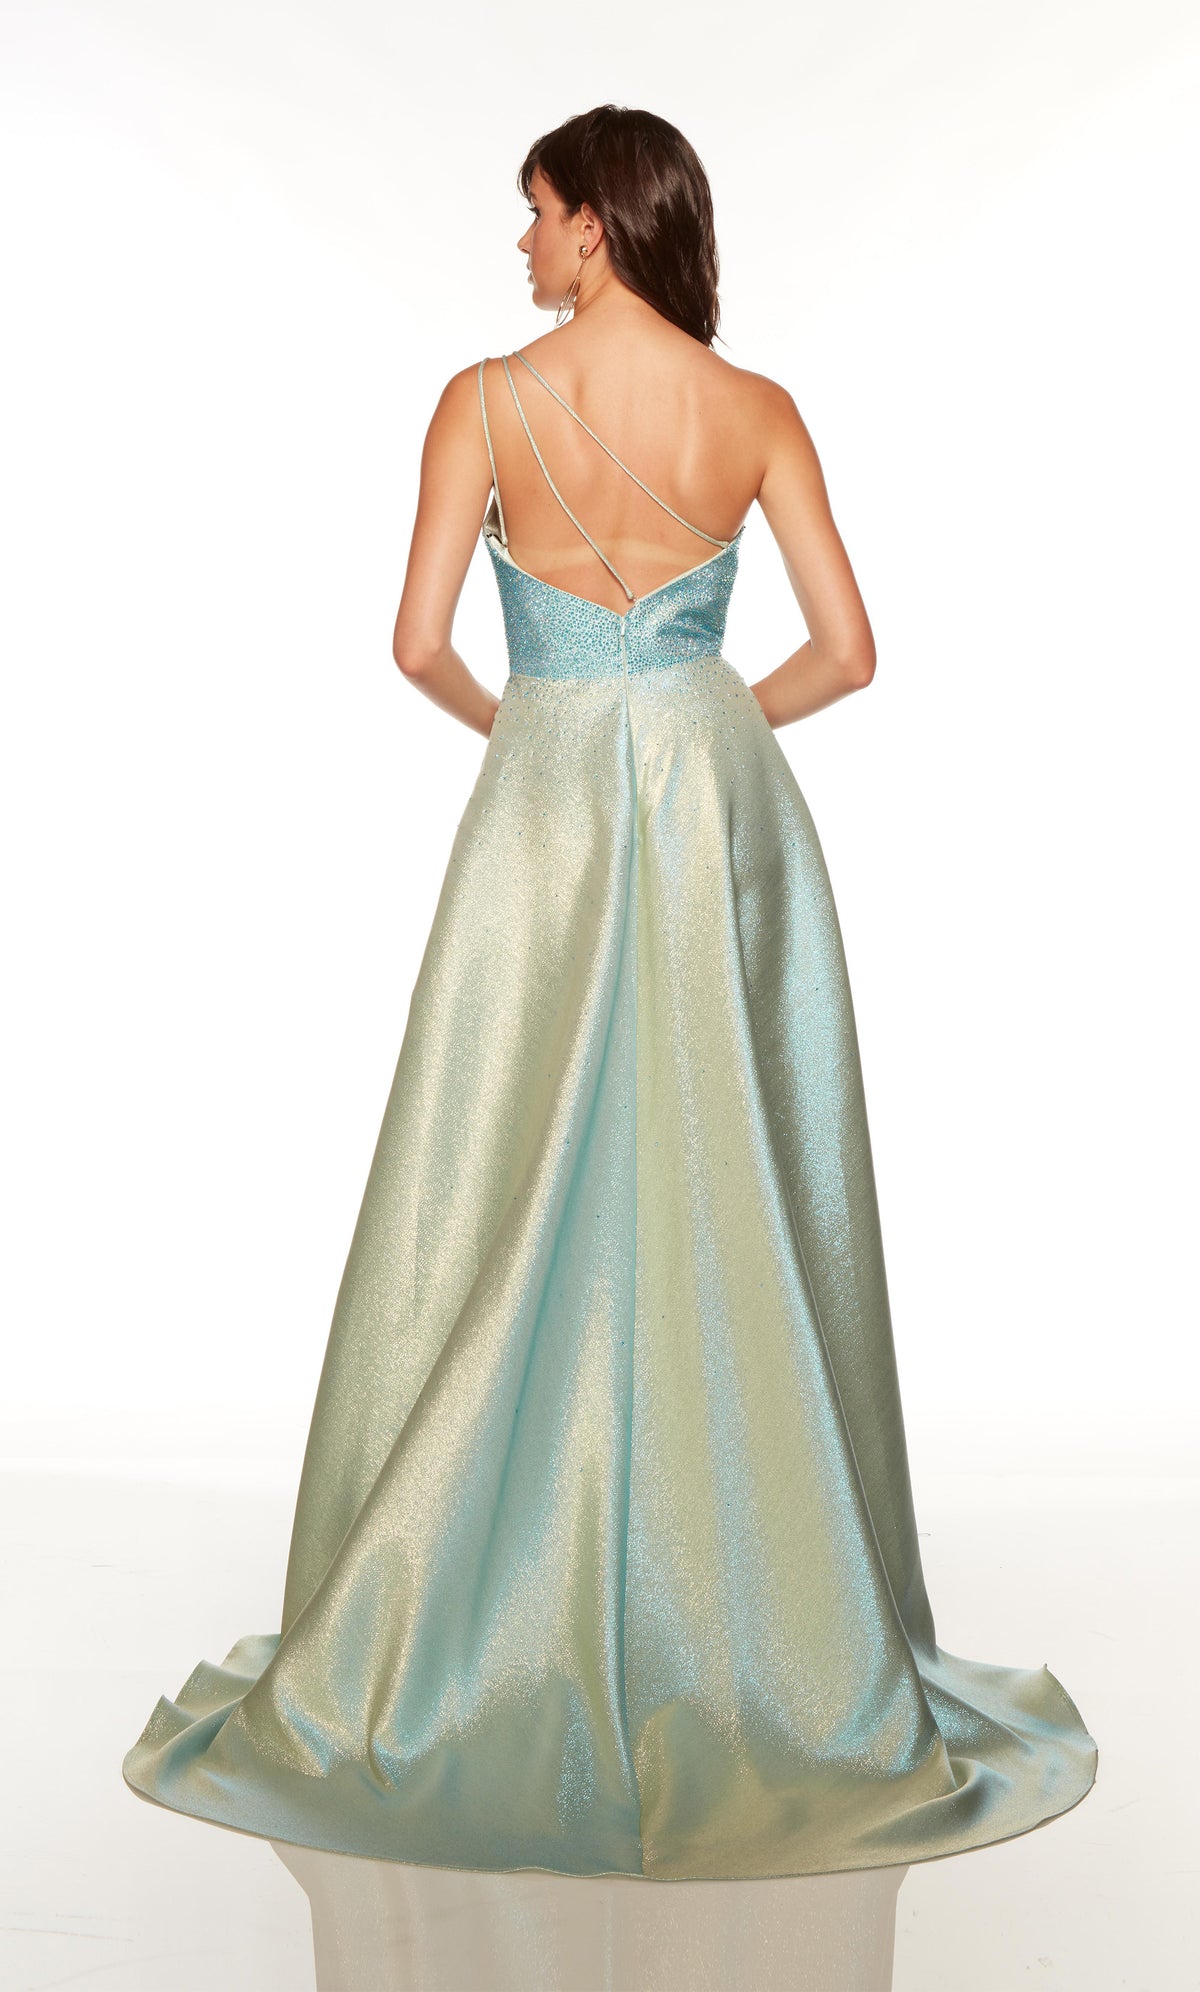 One shoulder sparkly formal dress with strappy back and train in iridescent blue-gold.